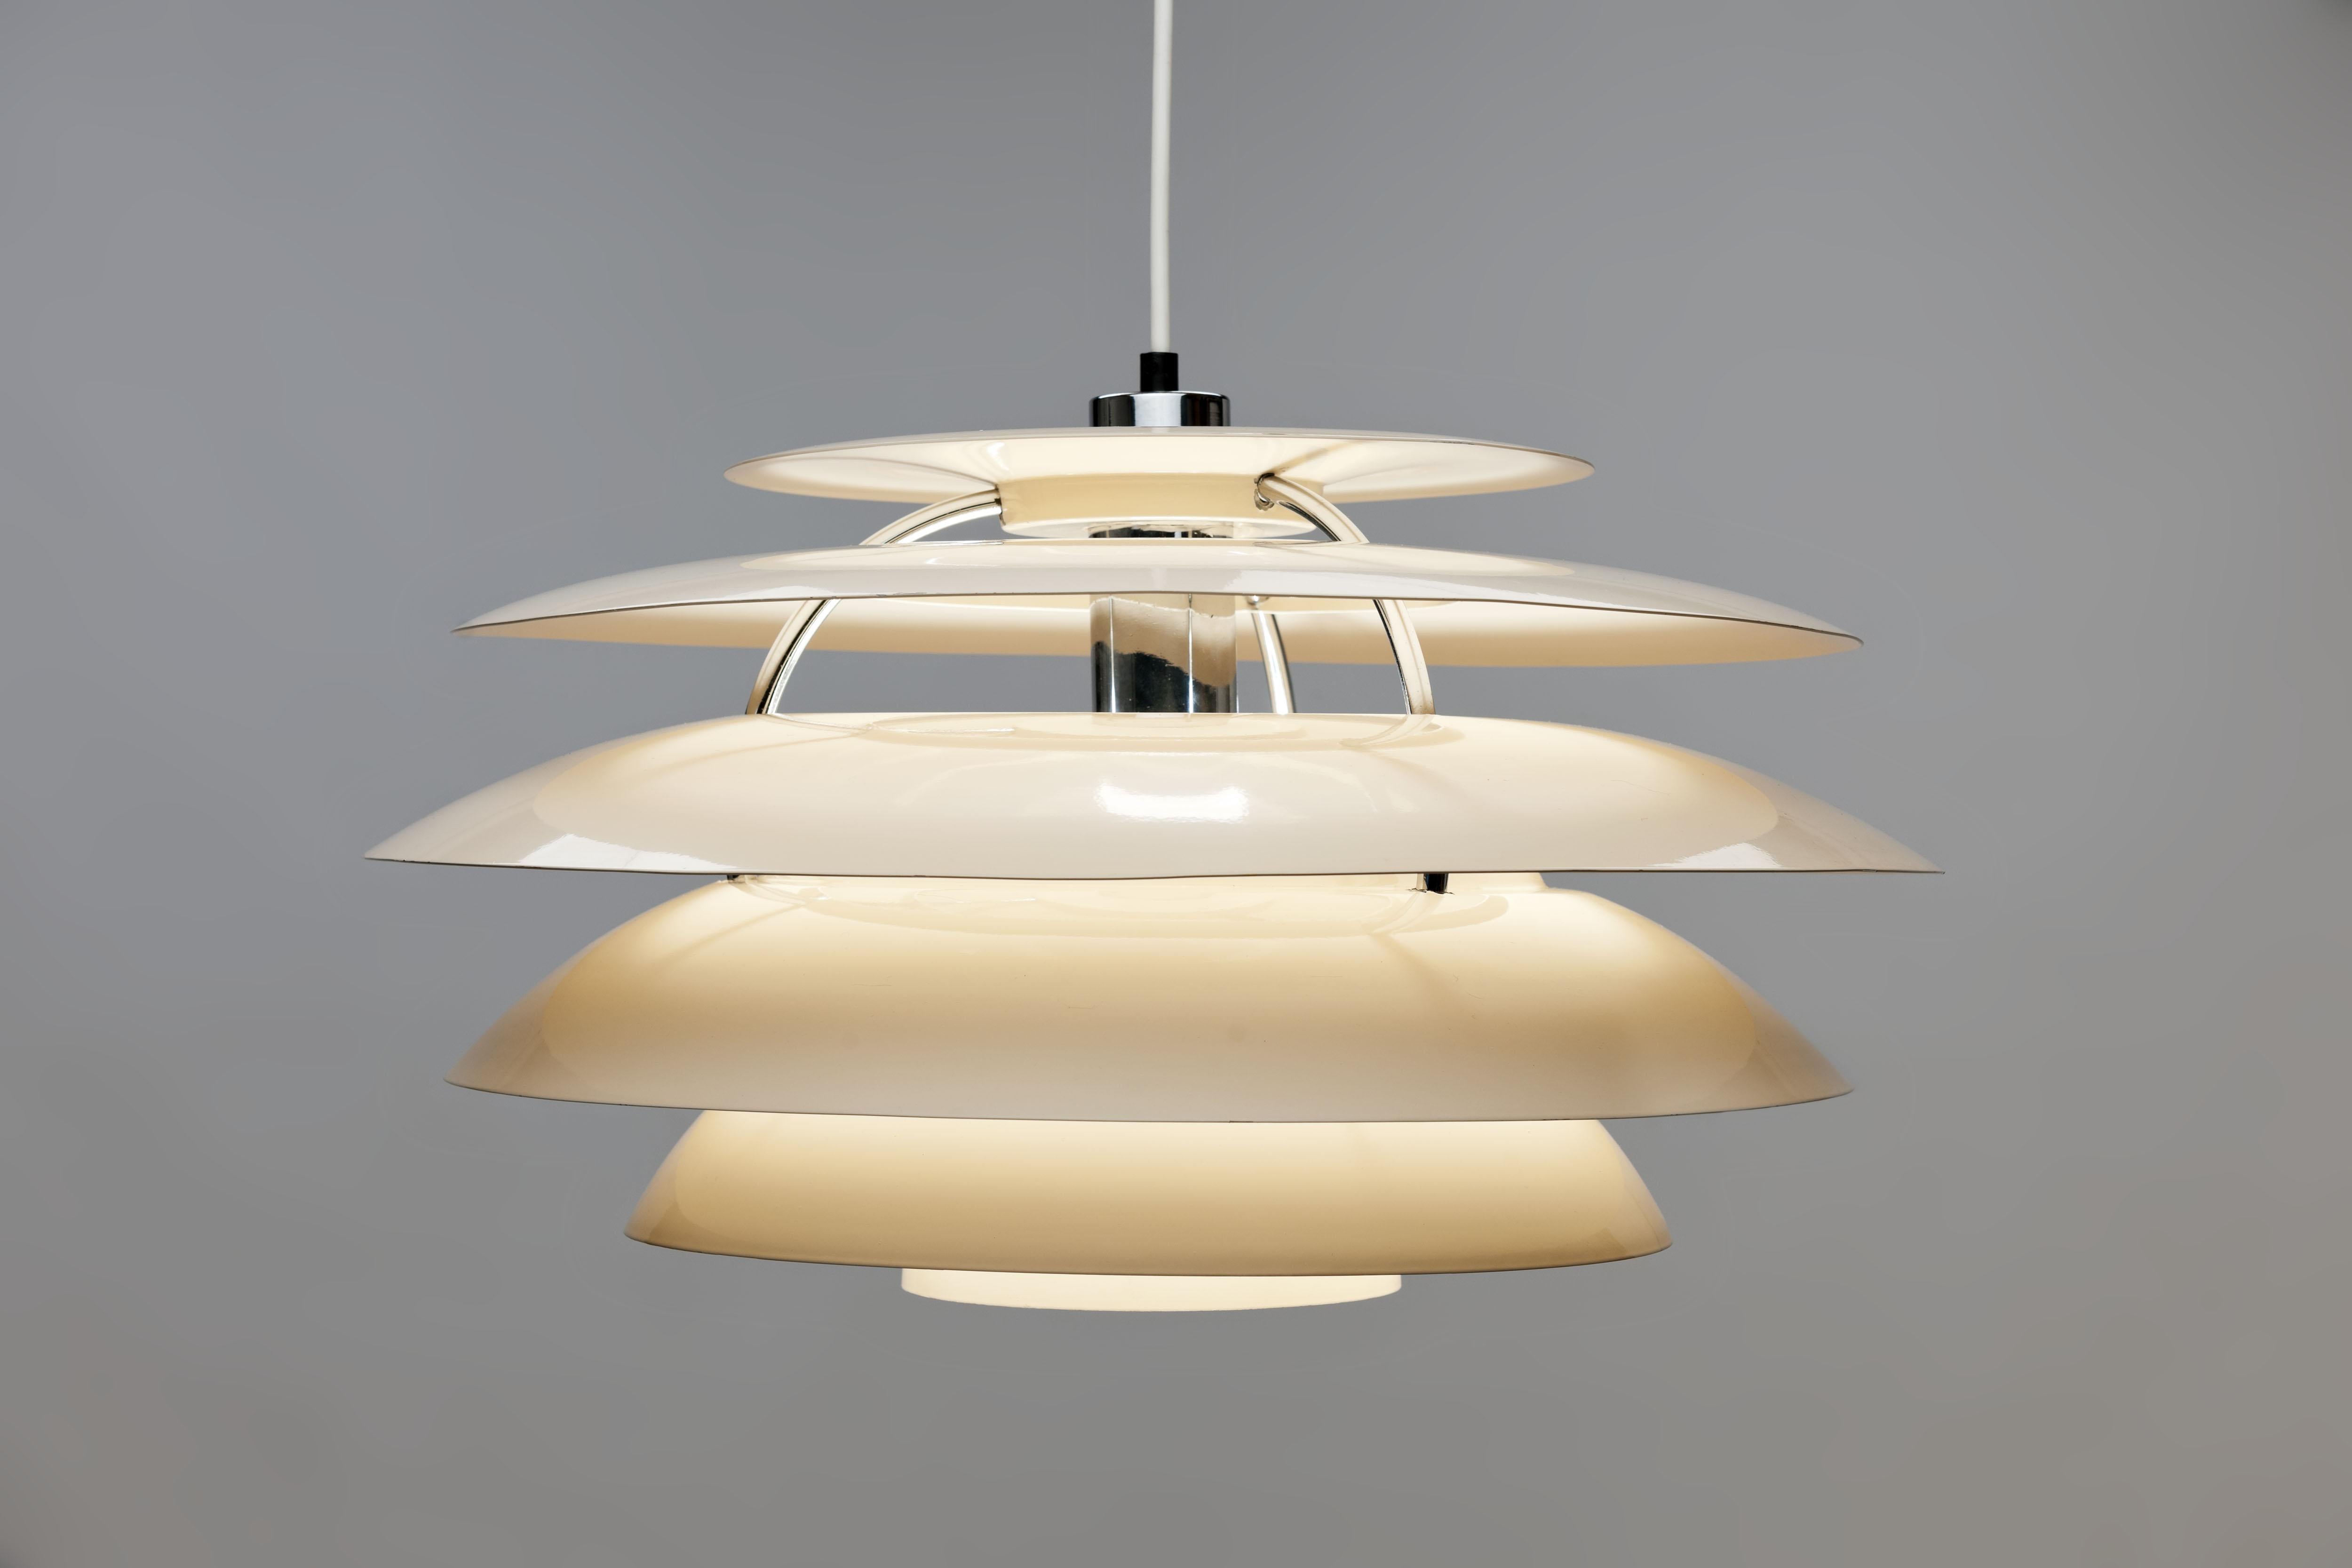 Pendant lamp model 1262 by Italian manufacturer Stilnovo from the early 1960s. Luminaire with 6 white high-gloss lacquered metal discs and chromed connections.
The fixture provides a generous amount of nice, even light, while the high-gloss lacquer